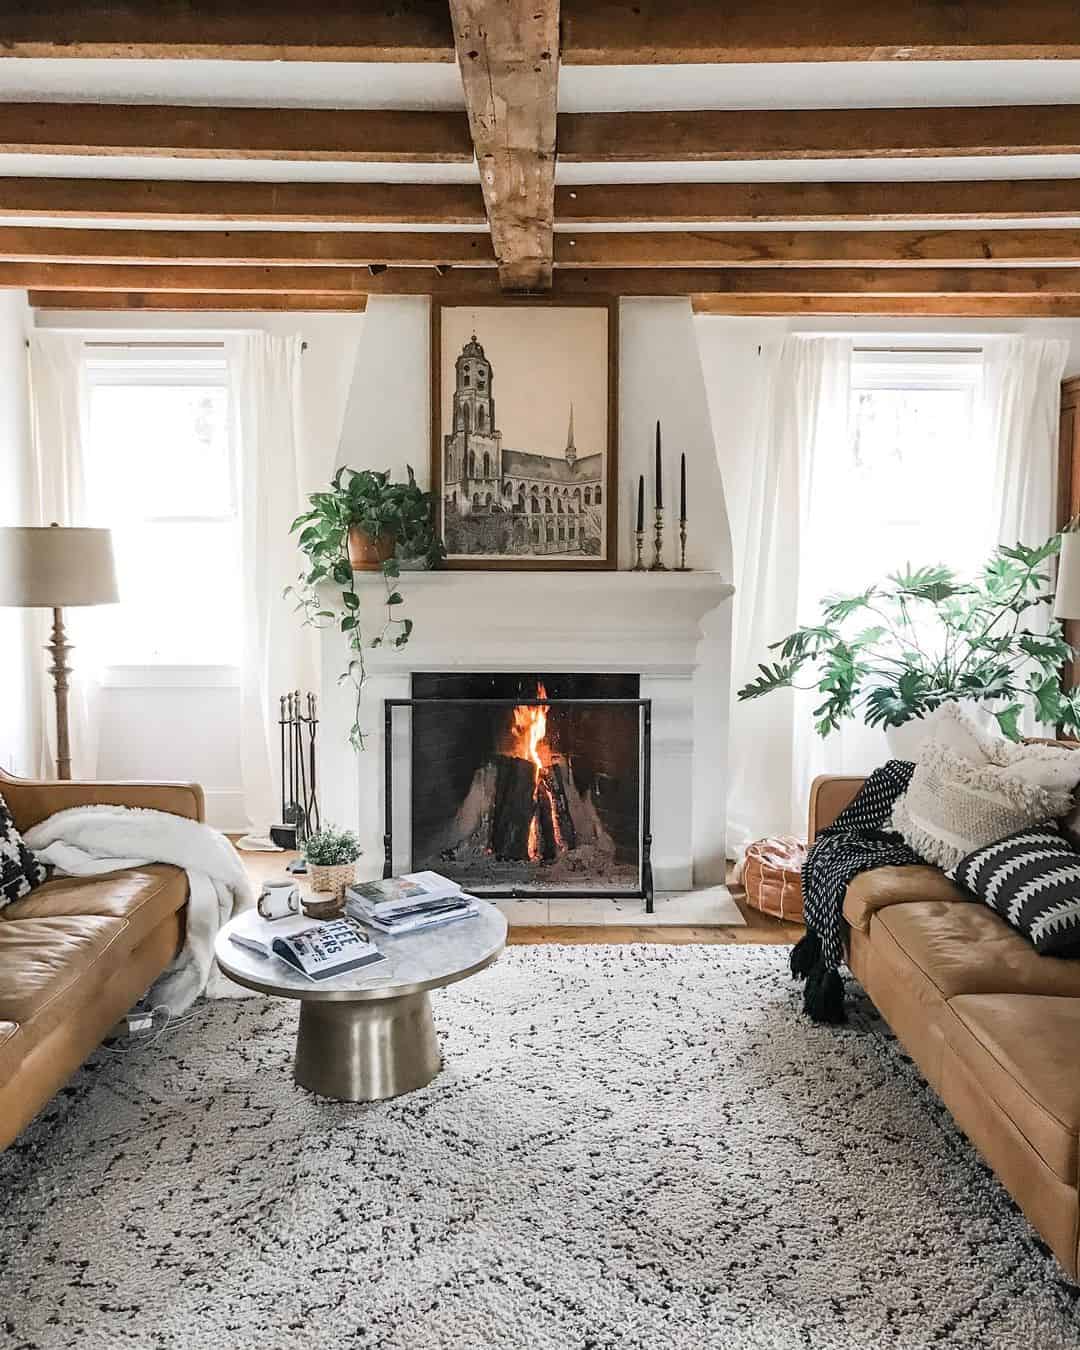 Farmhouse-Style Charm with Exposed Natural Wood Beams